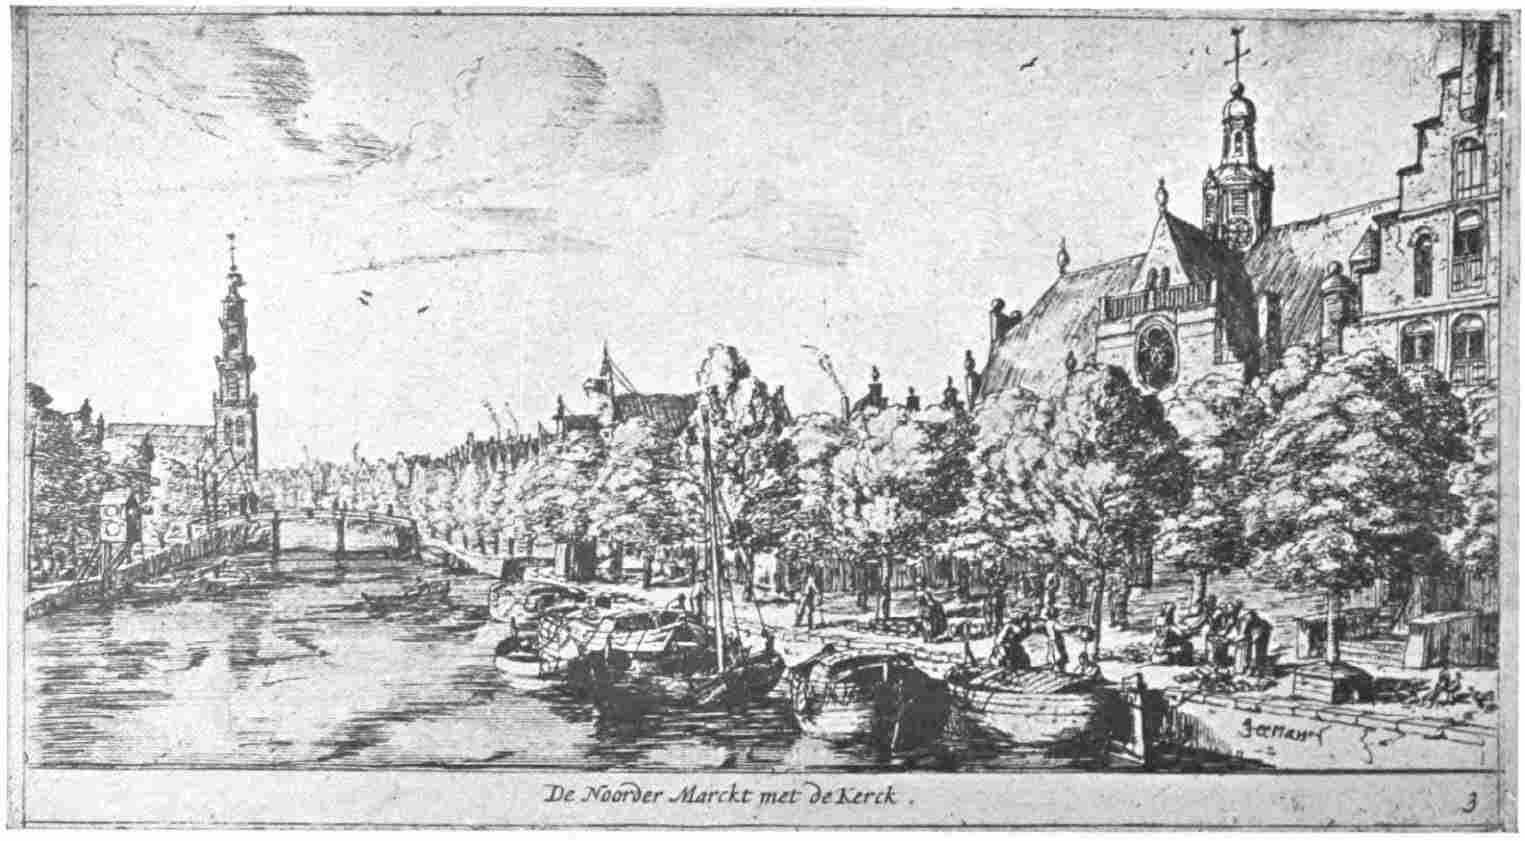 Plate 14. The Canal called “Prinsengracht” in Amsterdam.